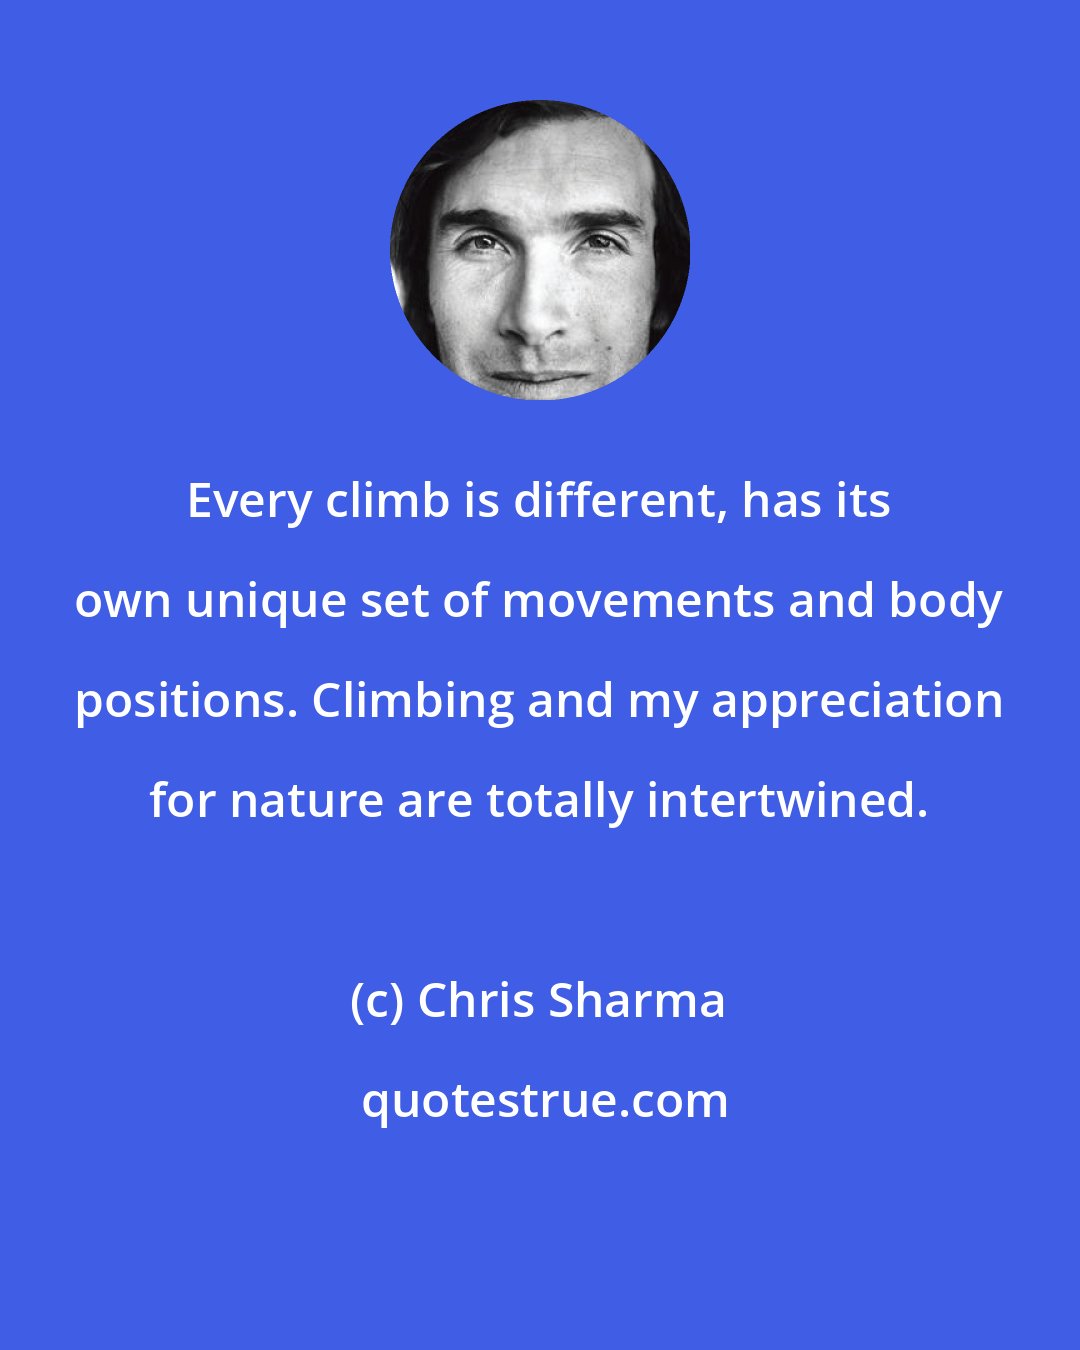 Chris Sharma: Every climb is different, has its own unique set of movements and body positions. Climbing and my appreciation for nature are totally intertwined.